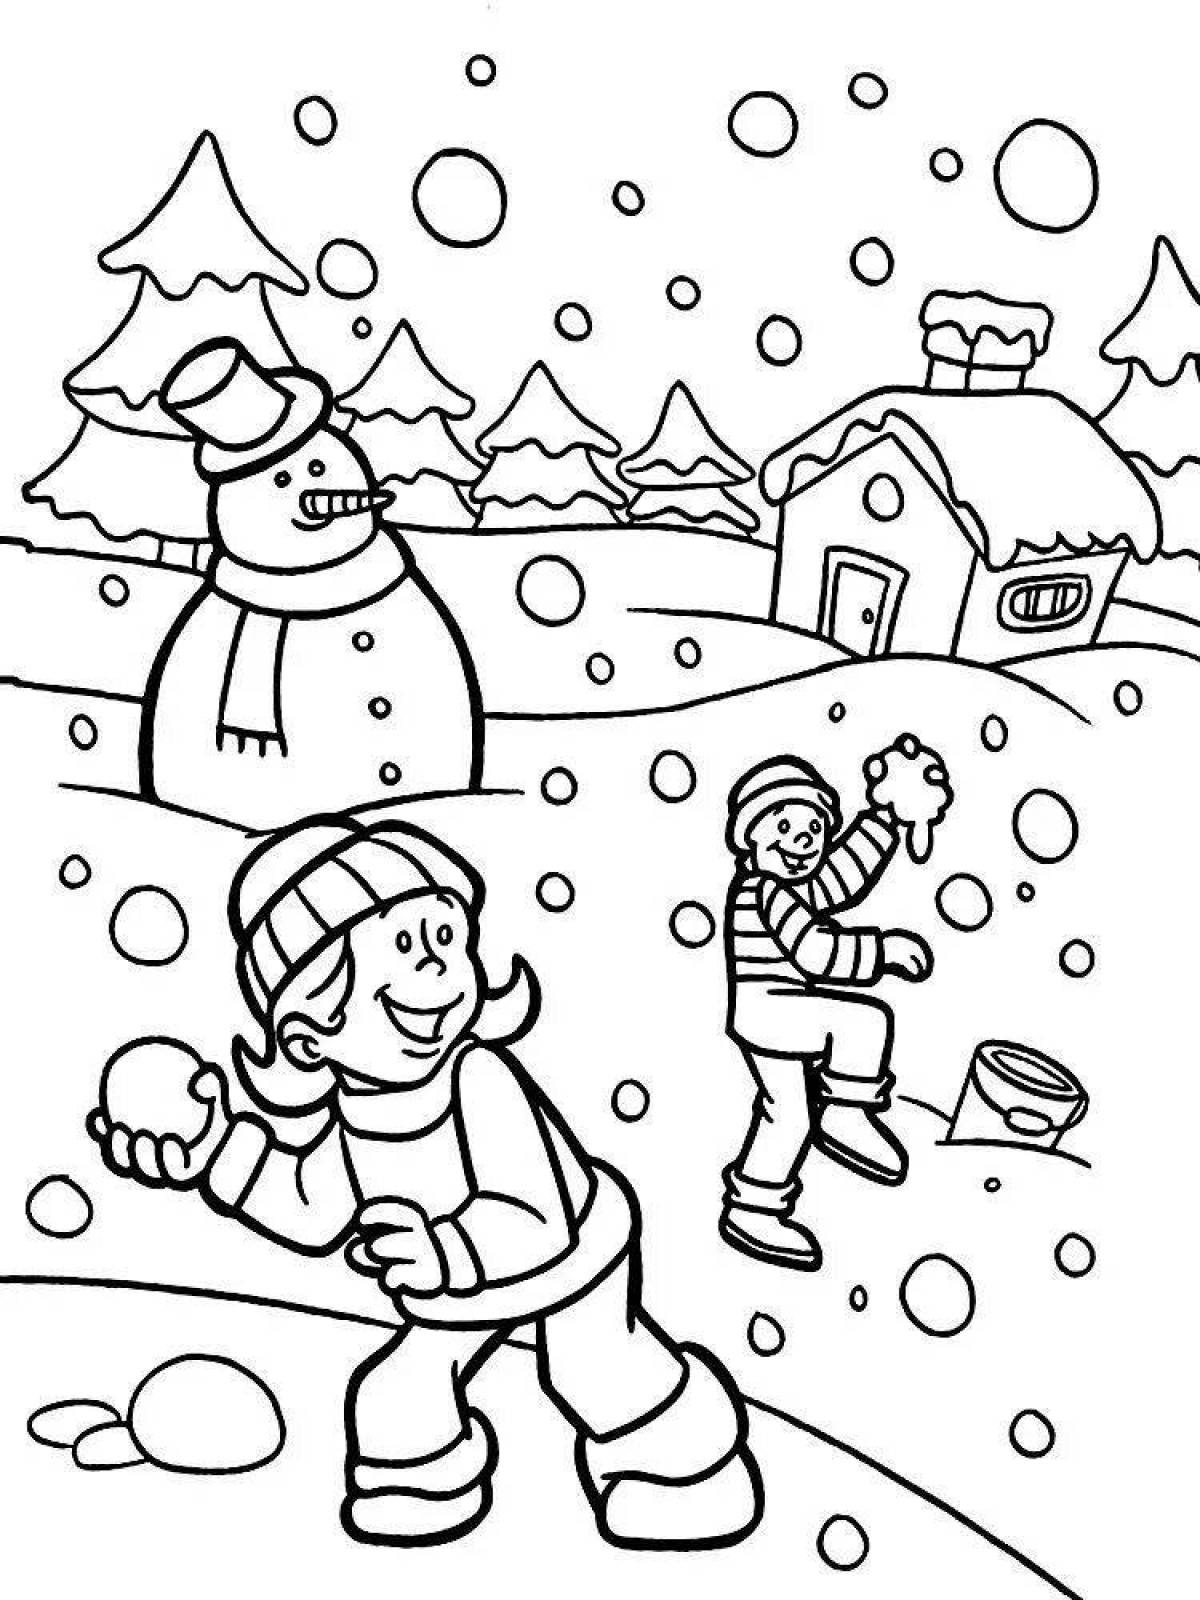 Furry winter coloring book